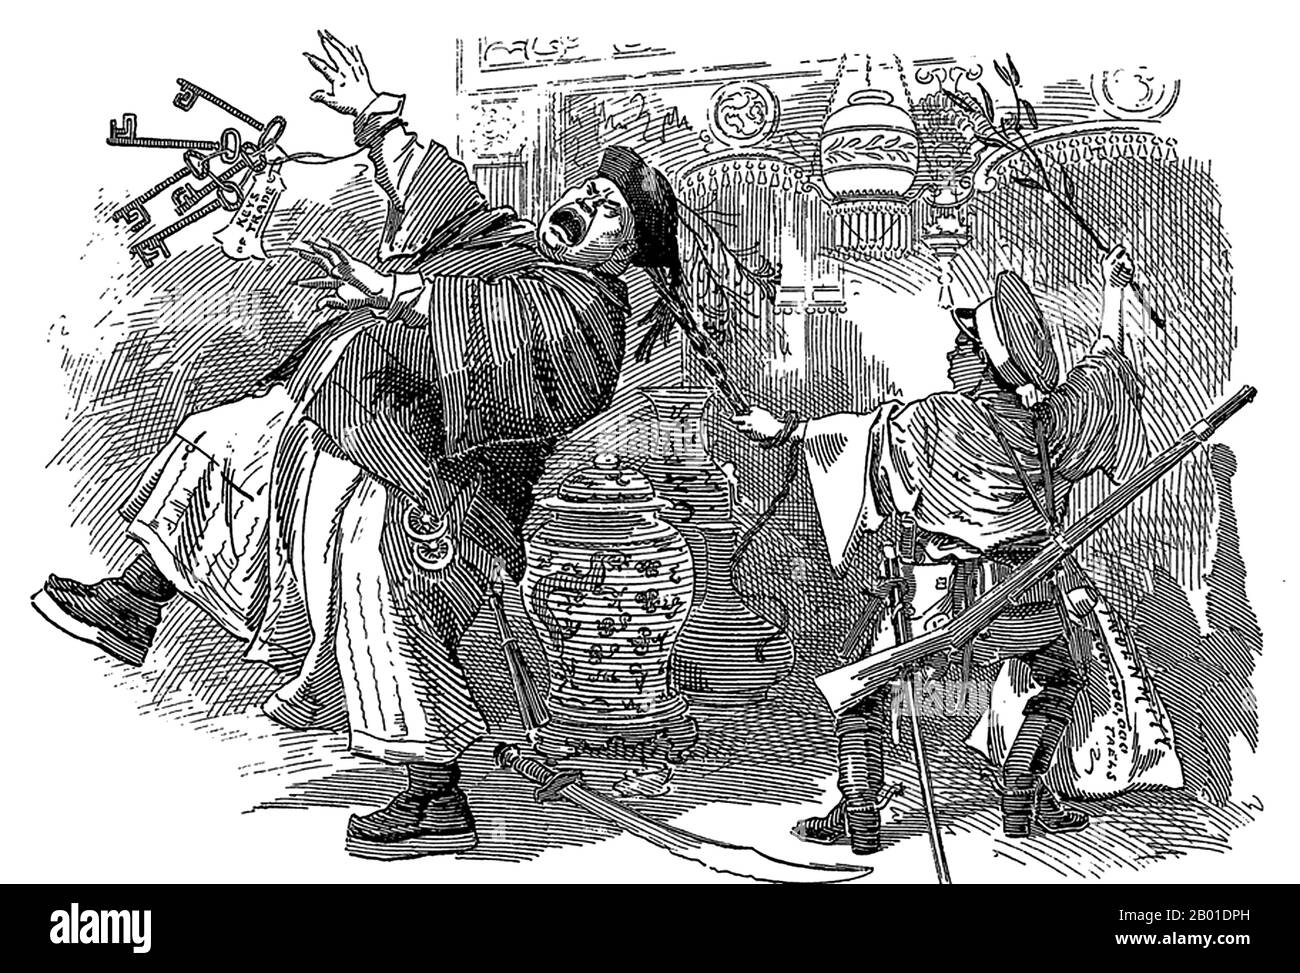 China/UK: 'Jap in a China Shop'. Satirical British cartoon of the Sino-Japanese War (1 August 1894 - 17 April 1895) in which China was defeated and forced to cede territories and pay a large indemnity of 340 million silver taels to Japan. Illustration from Punch, 27 April 1895.  'Now then, you pig-headed old pig-tail open your shop - and hand me the keys!' At the time of the war, the Japanese were seen by many Westerners as 'plucky' rather than imperialist aggressors.  The First Sino-Japanese War was fought between Qing Dynasty China and Meiji Japan, primarily over control of Korea. Stock Photo